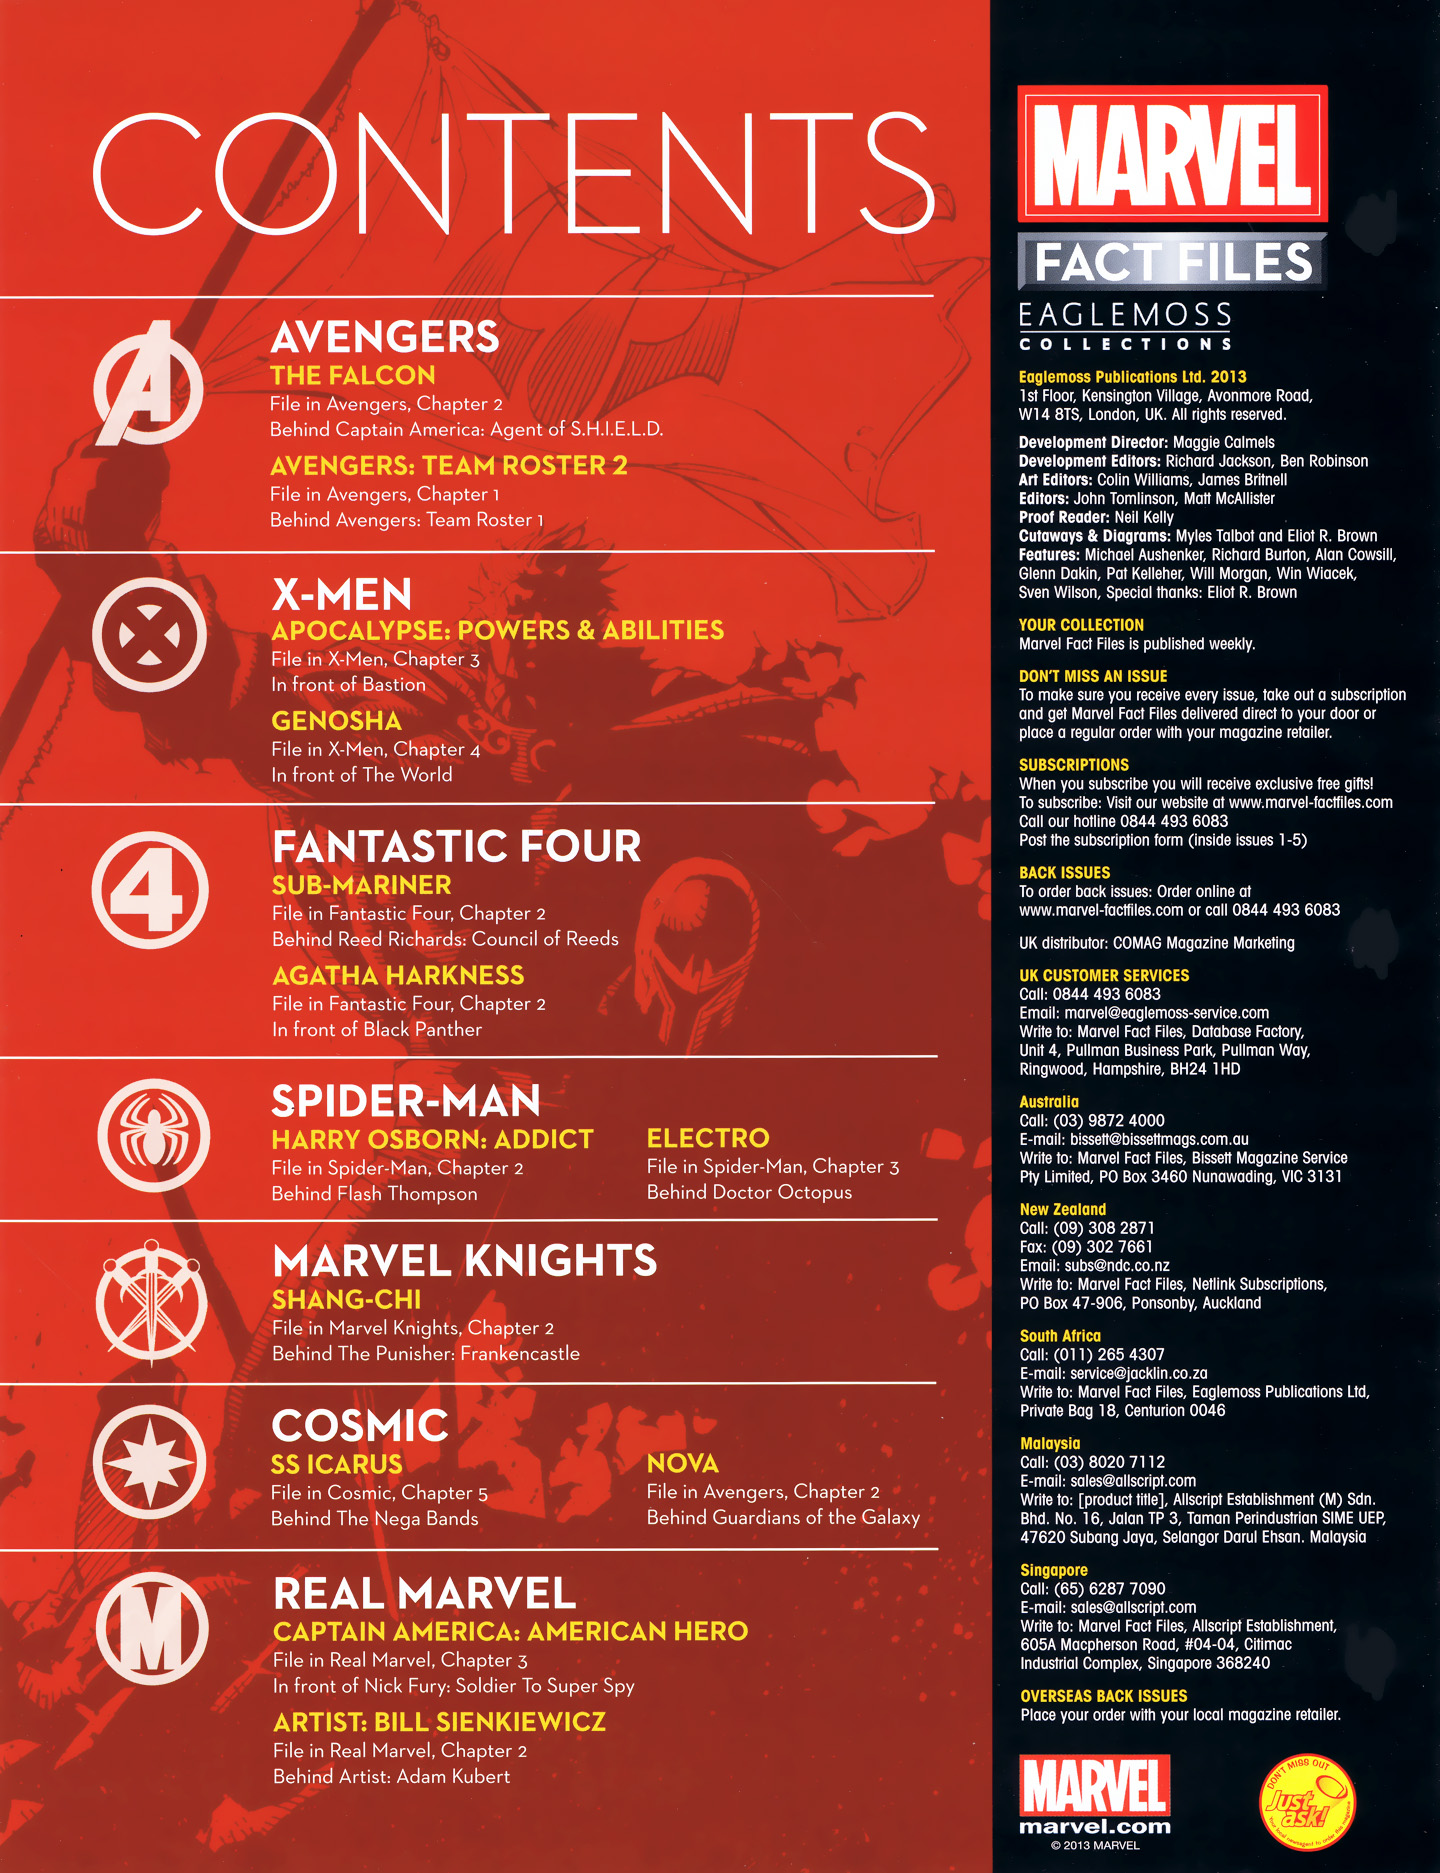 Read online Marvel Fact Files comic -  Issue #29 - 3